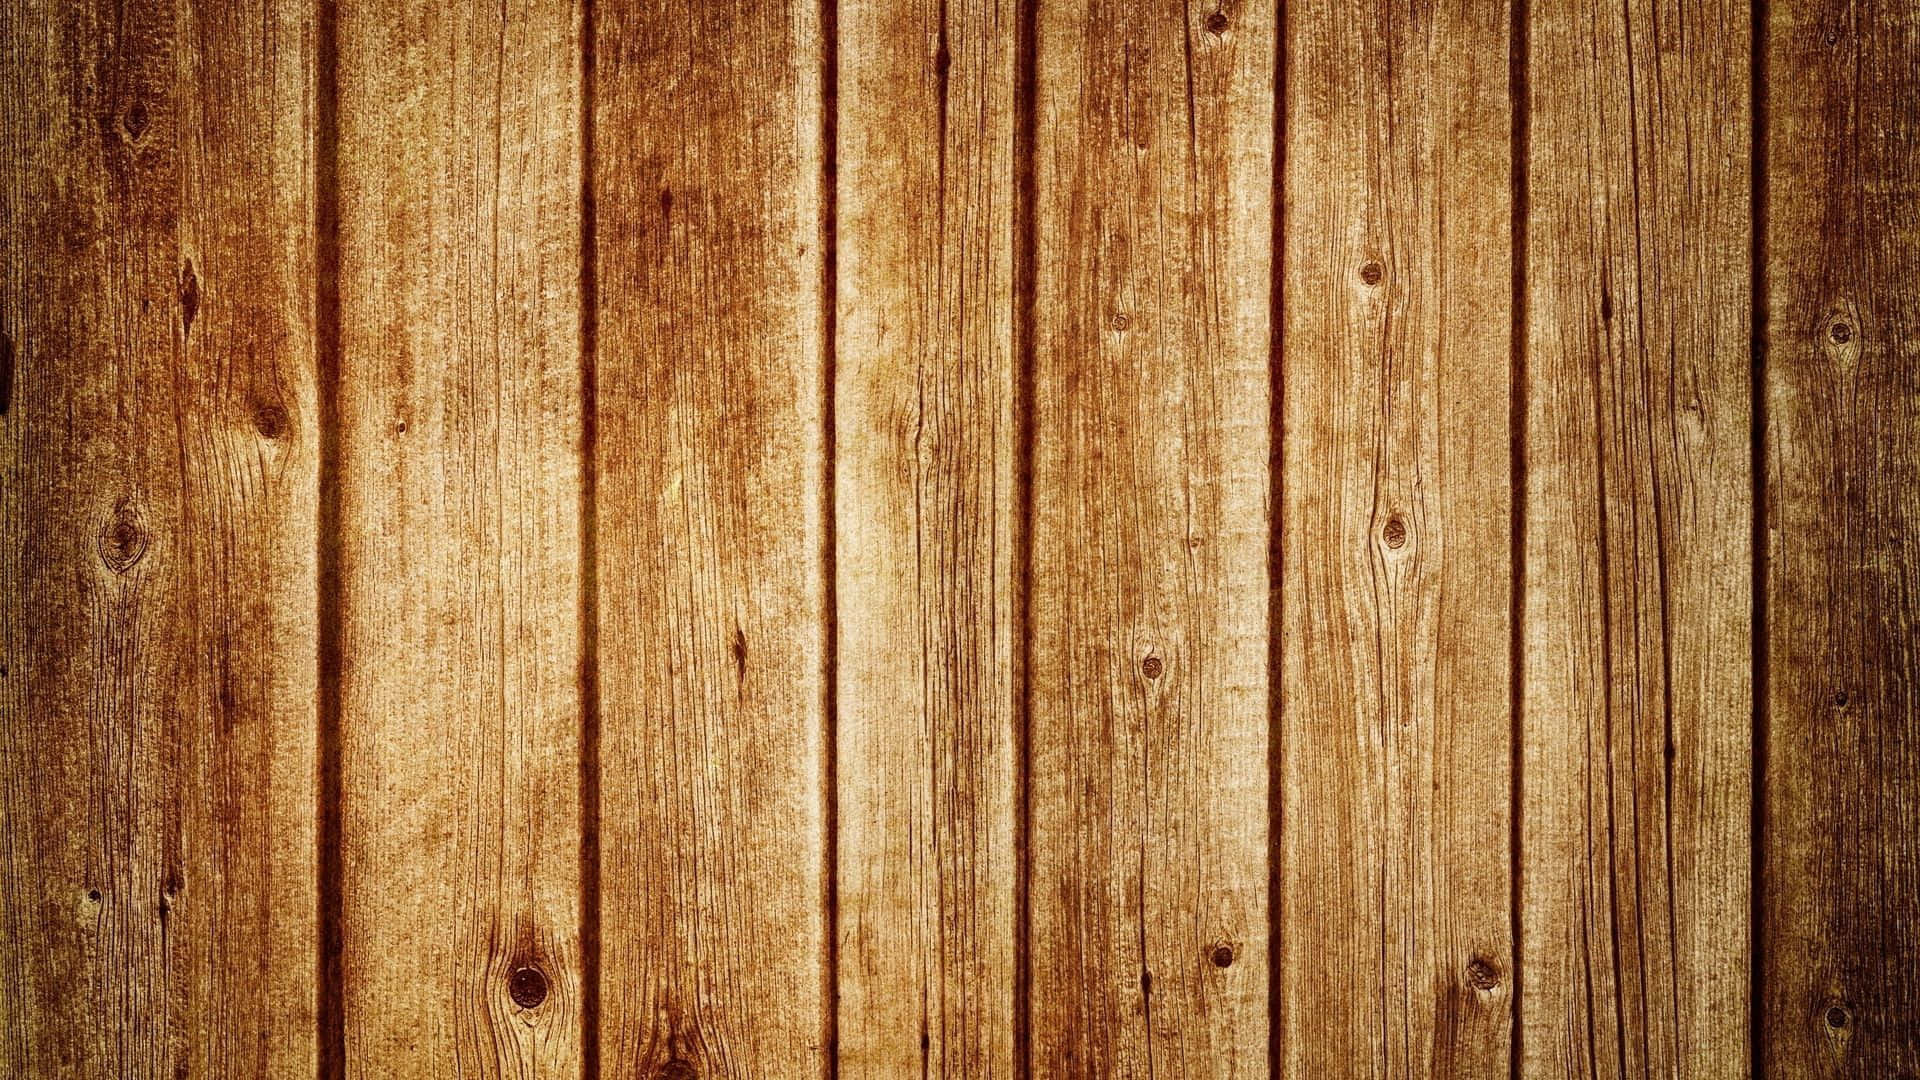 Captivating Wooden Texture Background